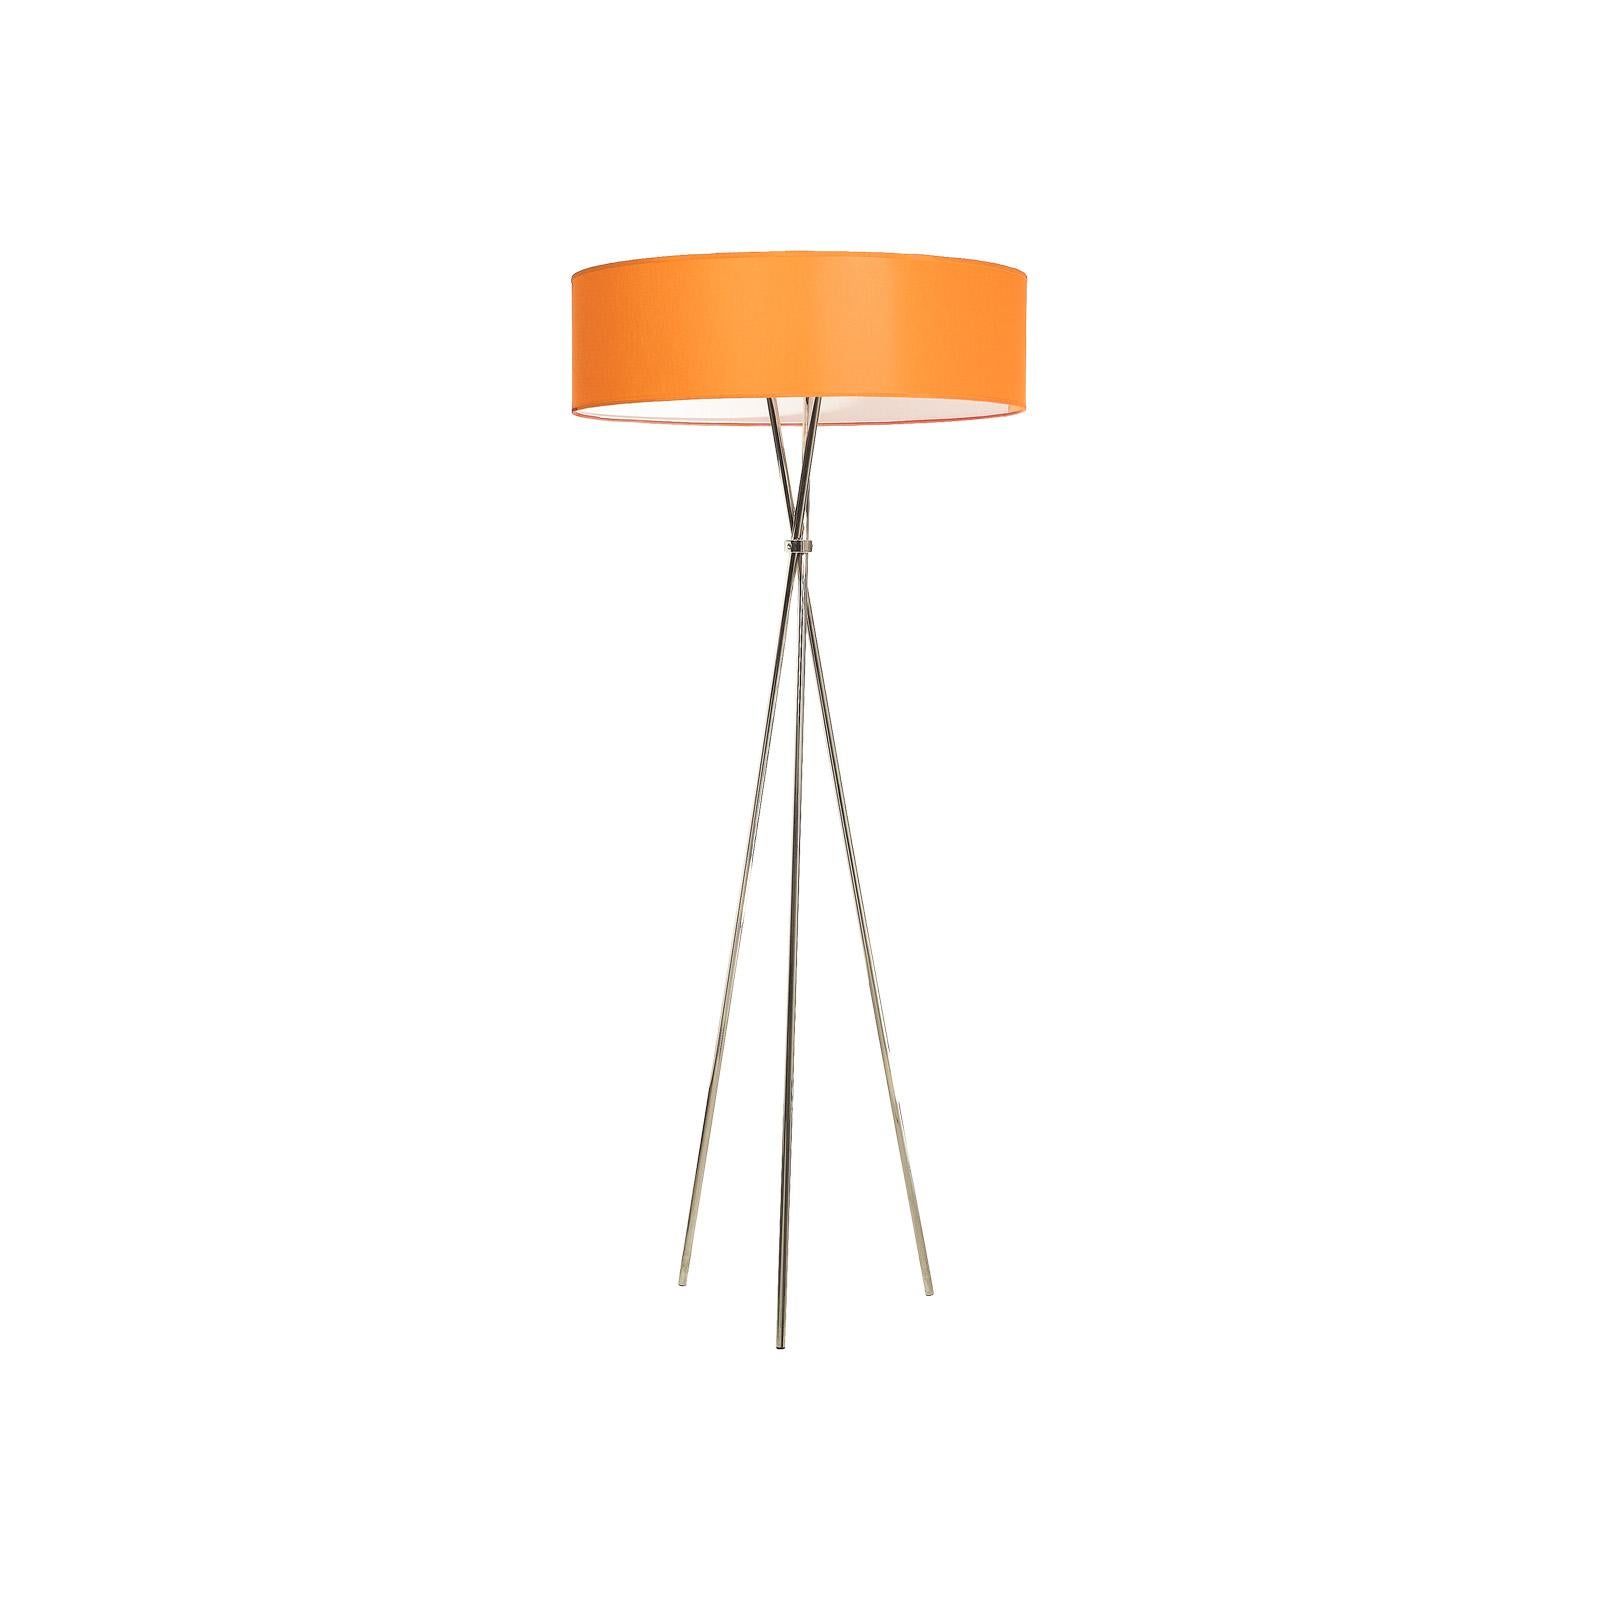 Hand-Crafted Modern Elegant Floor-Lamp with a Big Carton-Shade, 